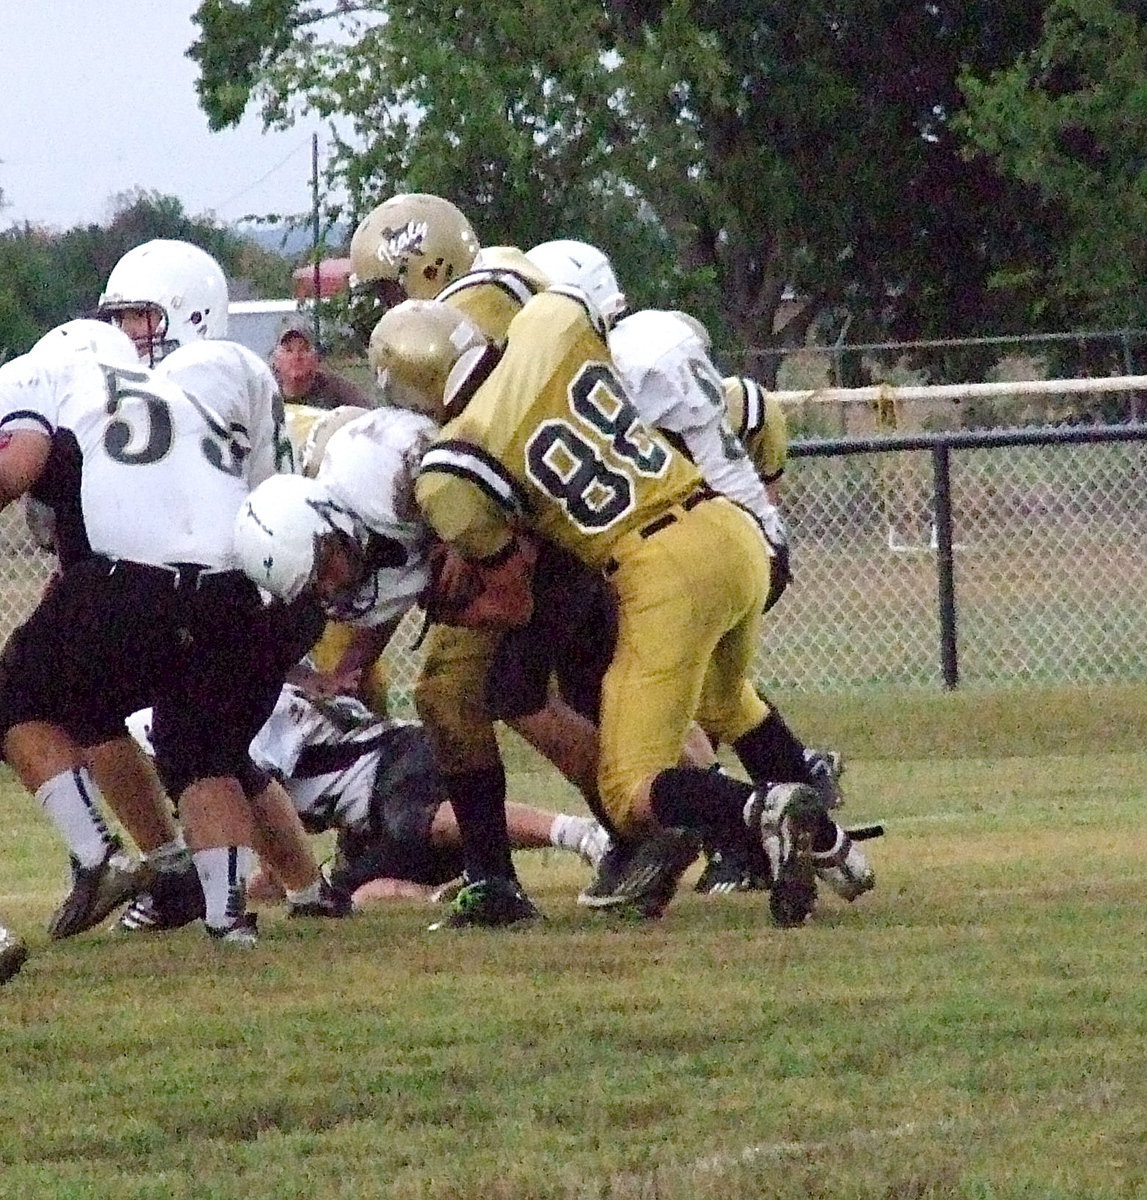 Image: Kyle Machovich(88) swoops in again for another tackle against Hubbard(88).